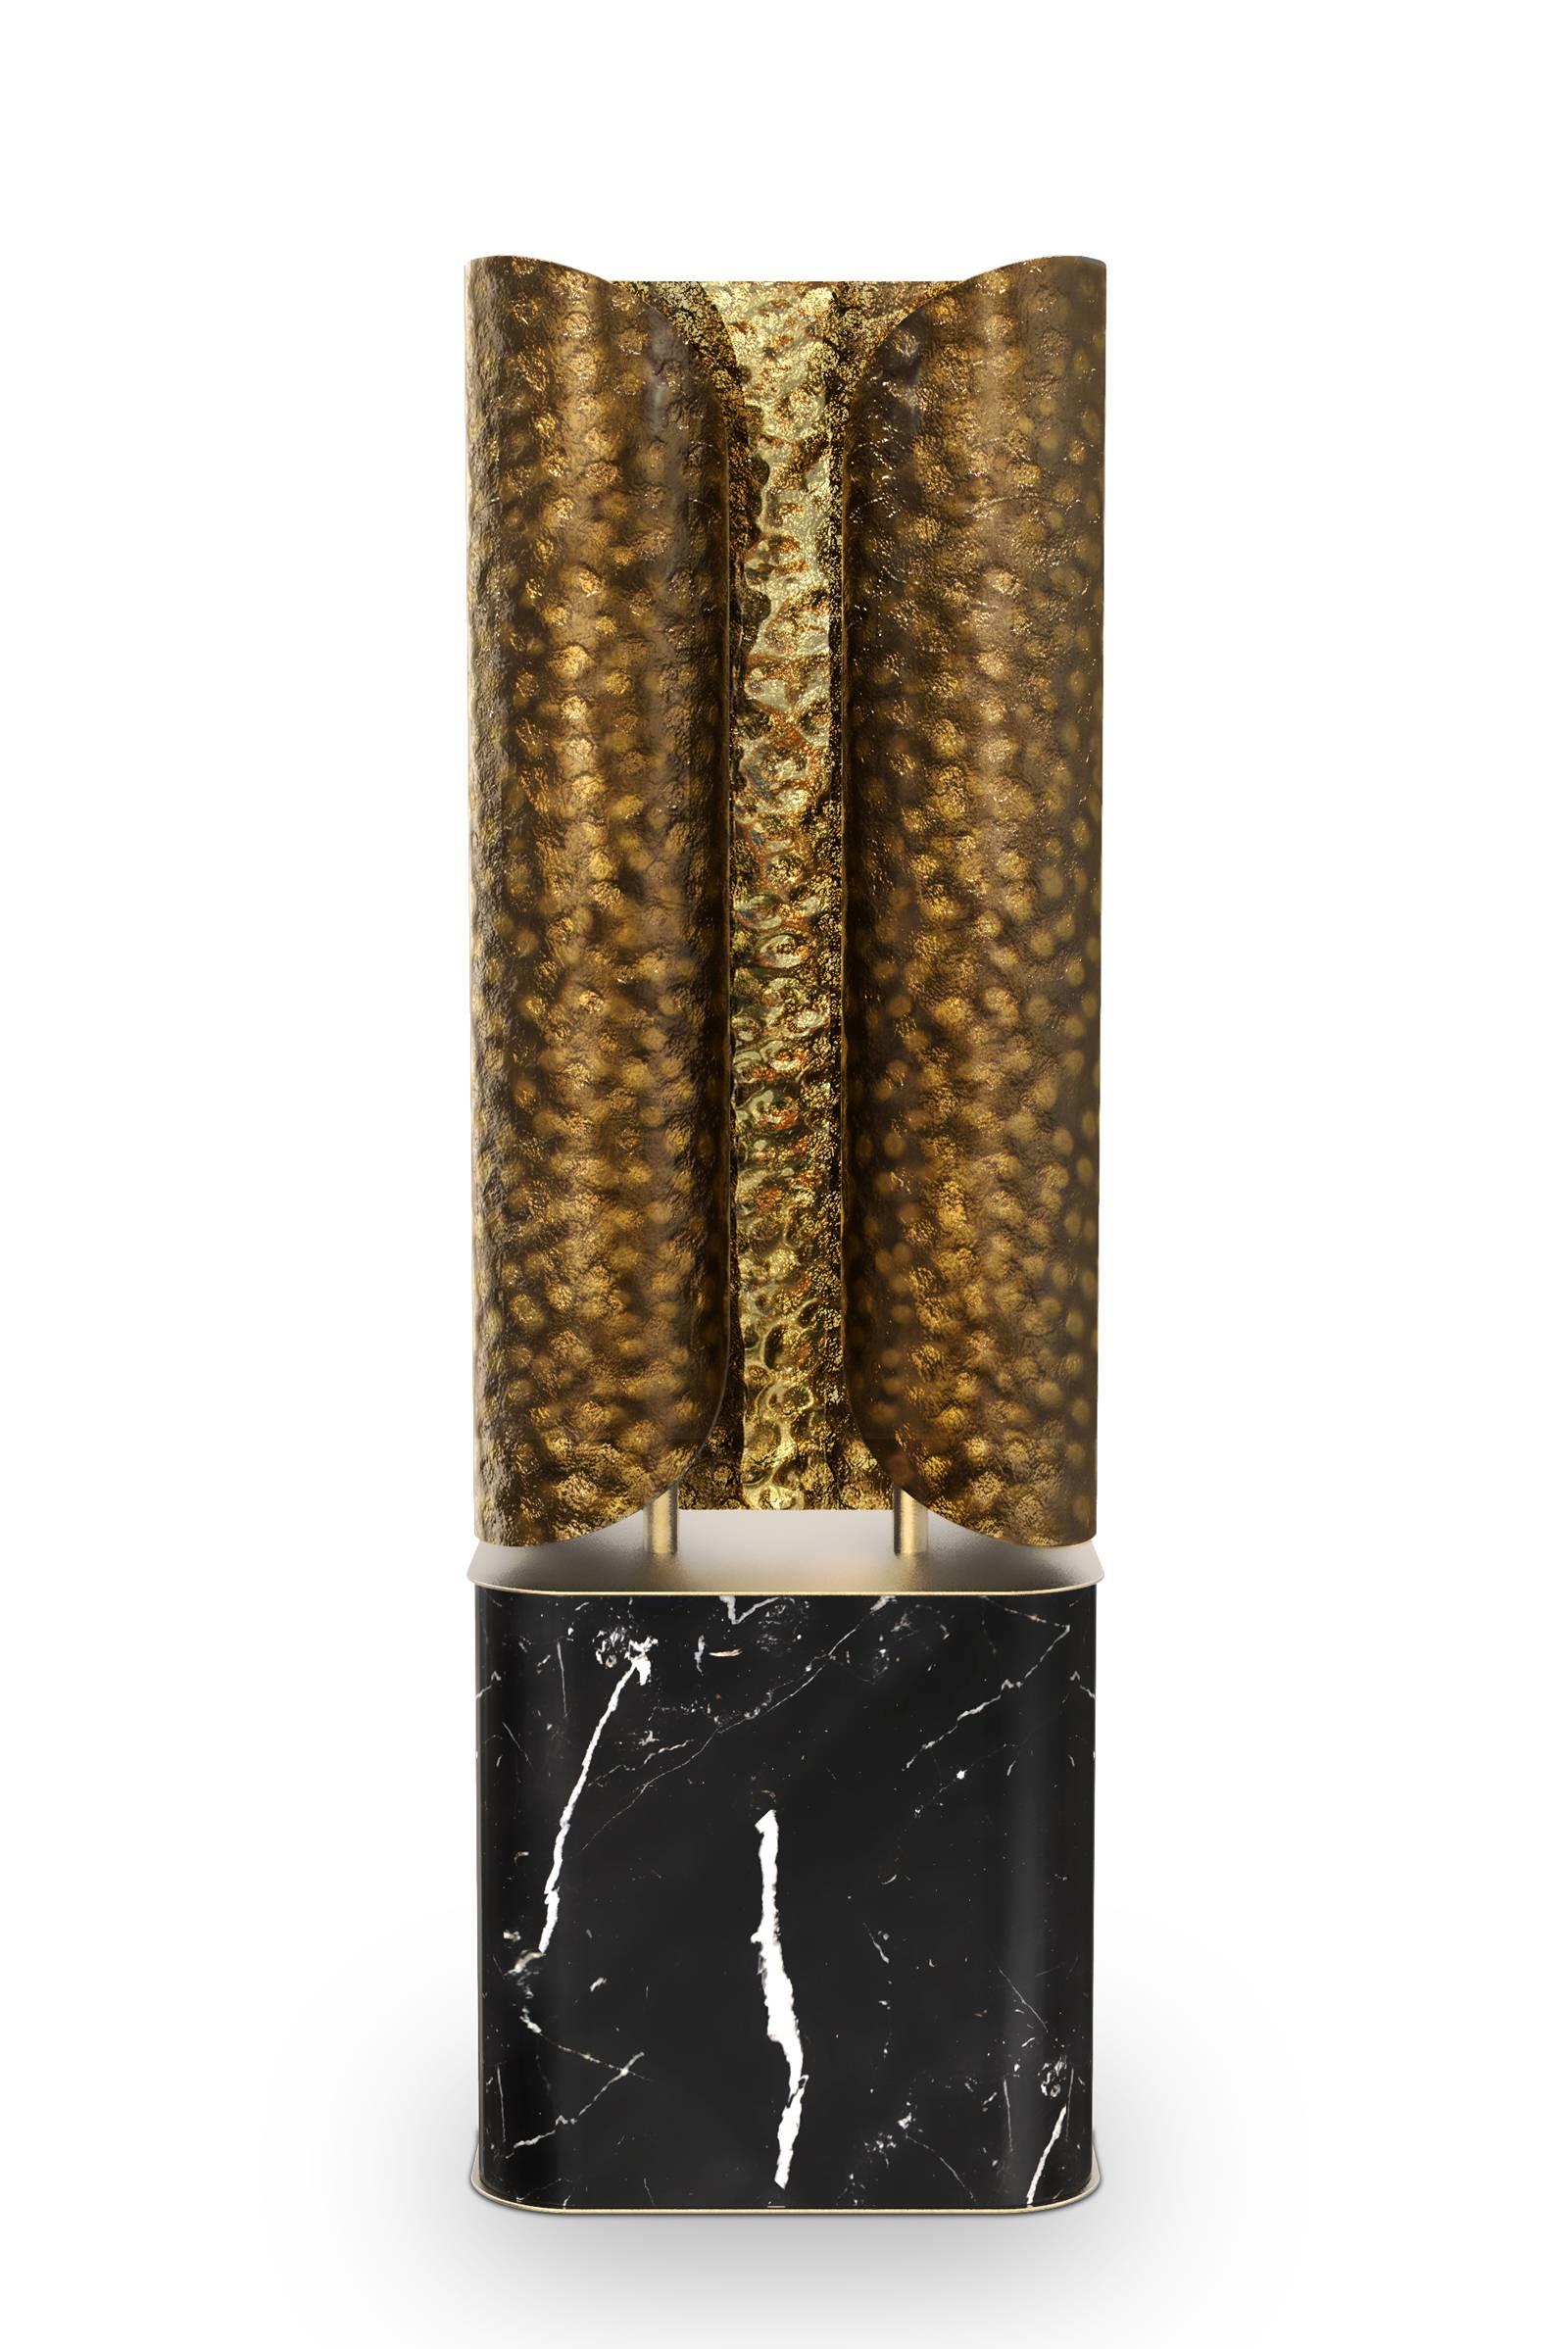 Table lamp tuba with handcrafted hammered aged
brush brass. Polished brass inside. Base in Nero 
Marquina marble. 